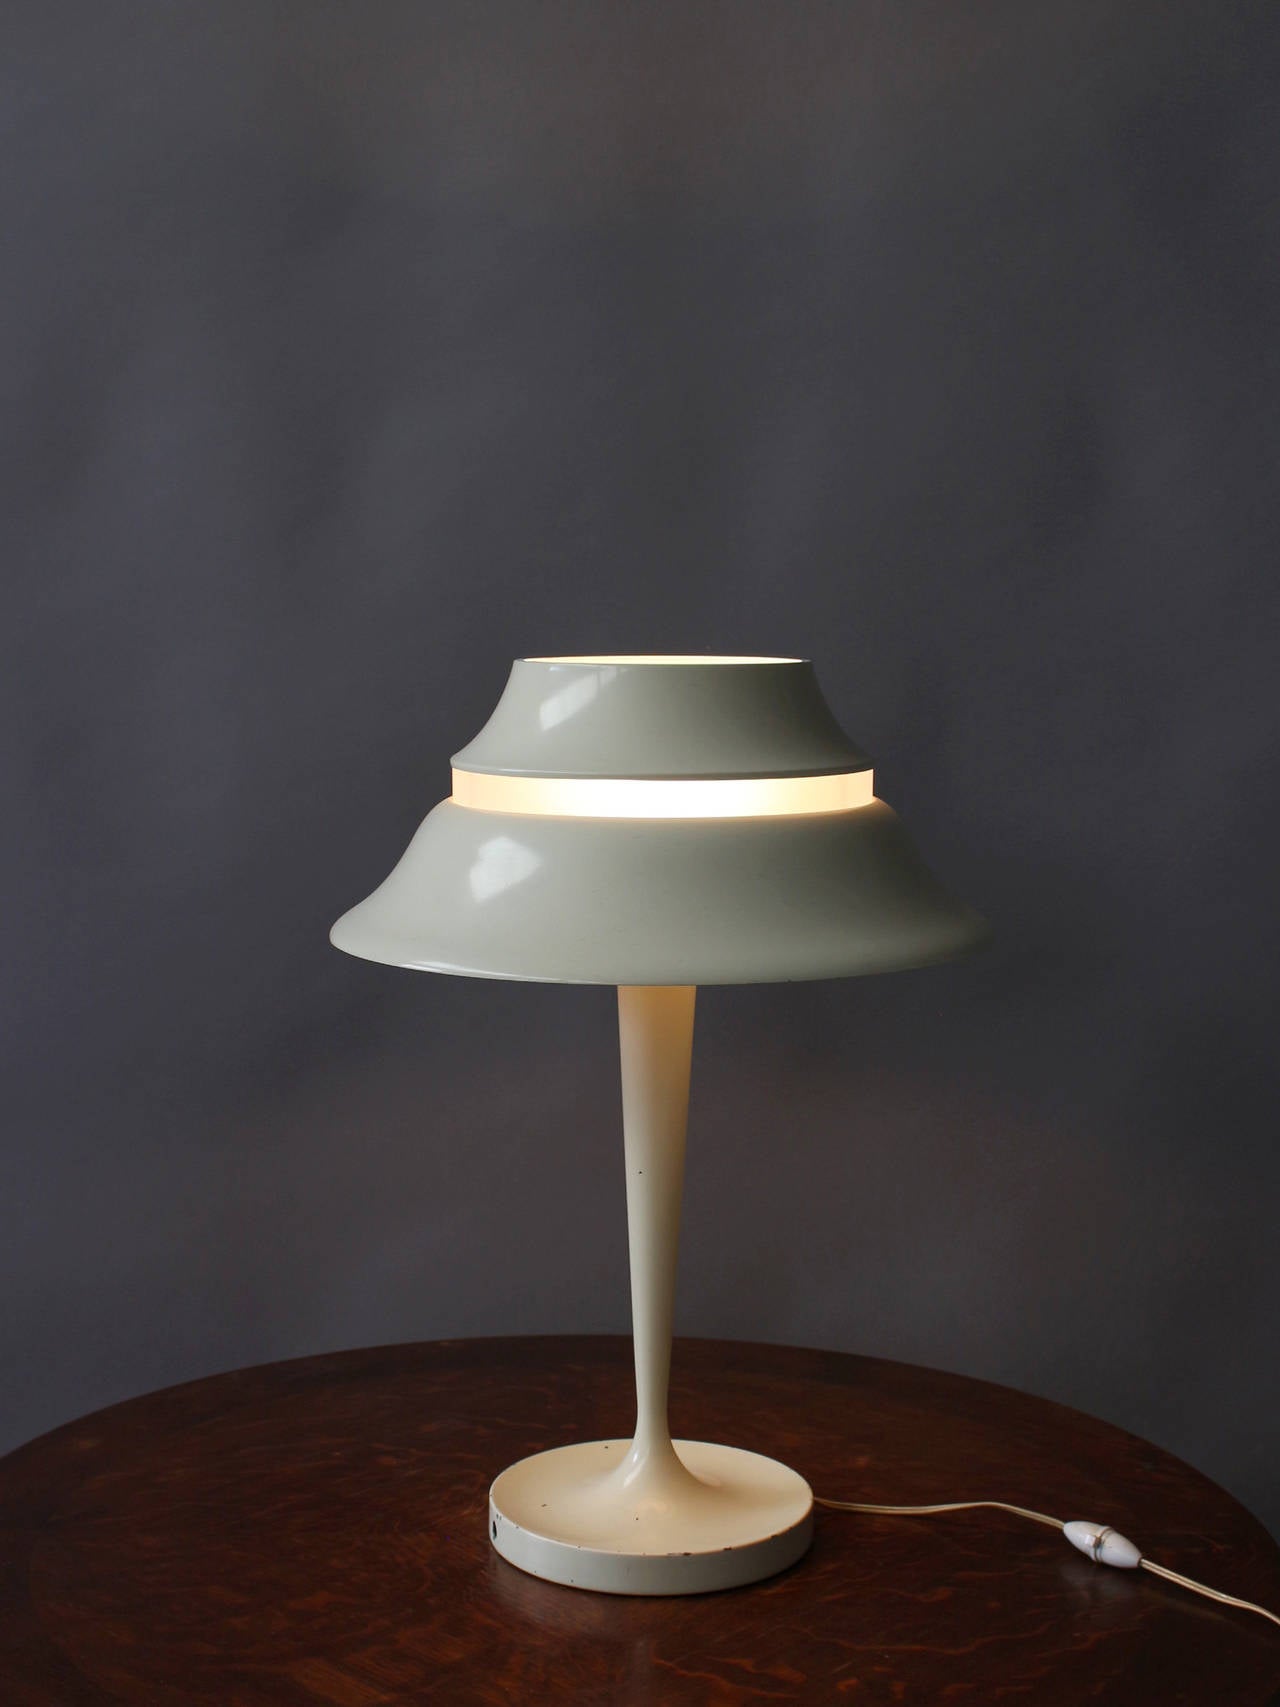 A Fine French Art Deco ivory lacquered table lamp with a frosted glass insert on the shade.
